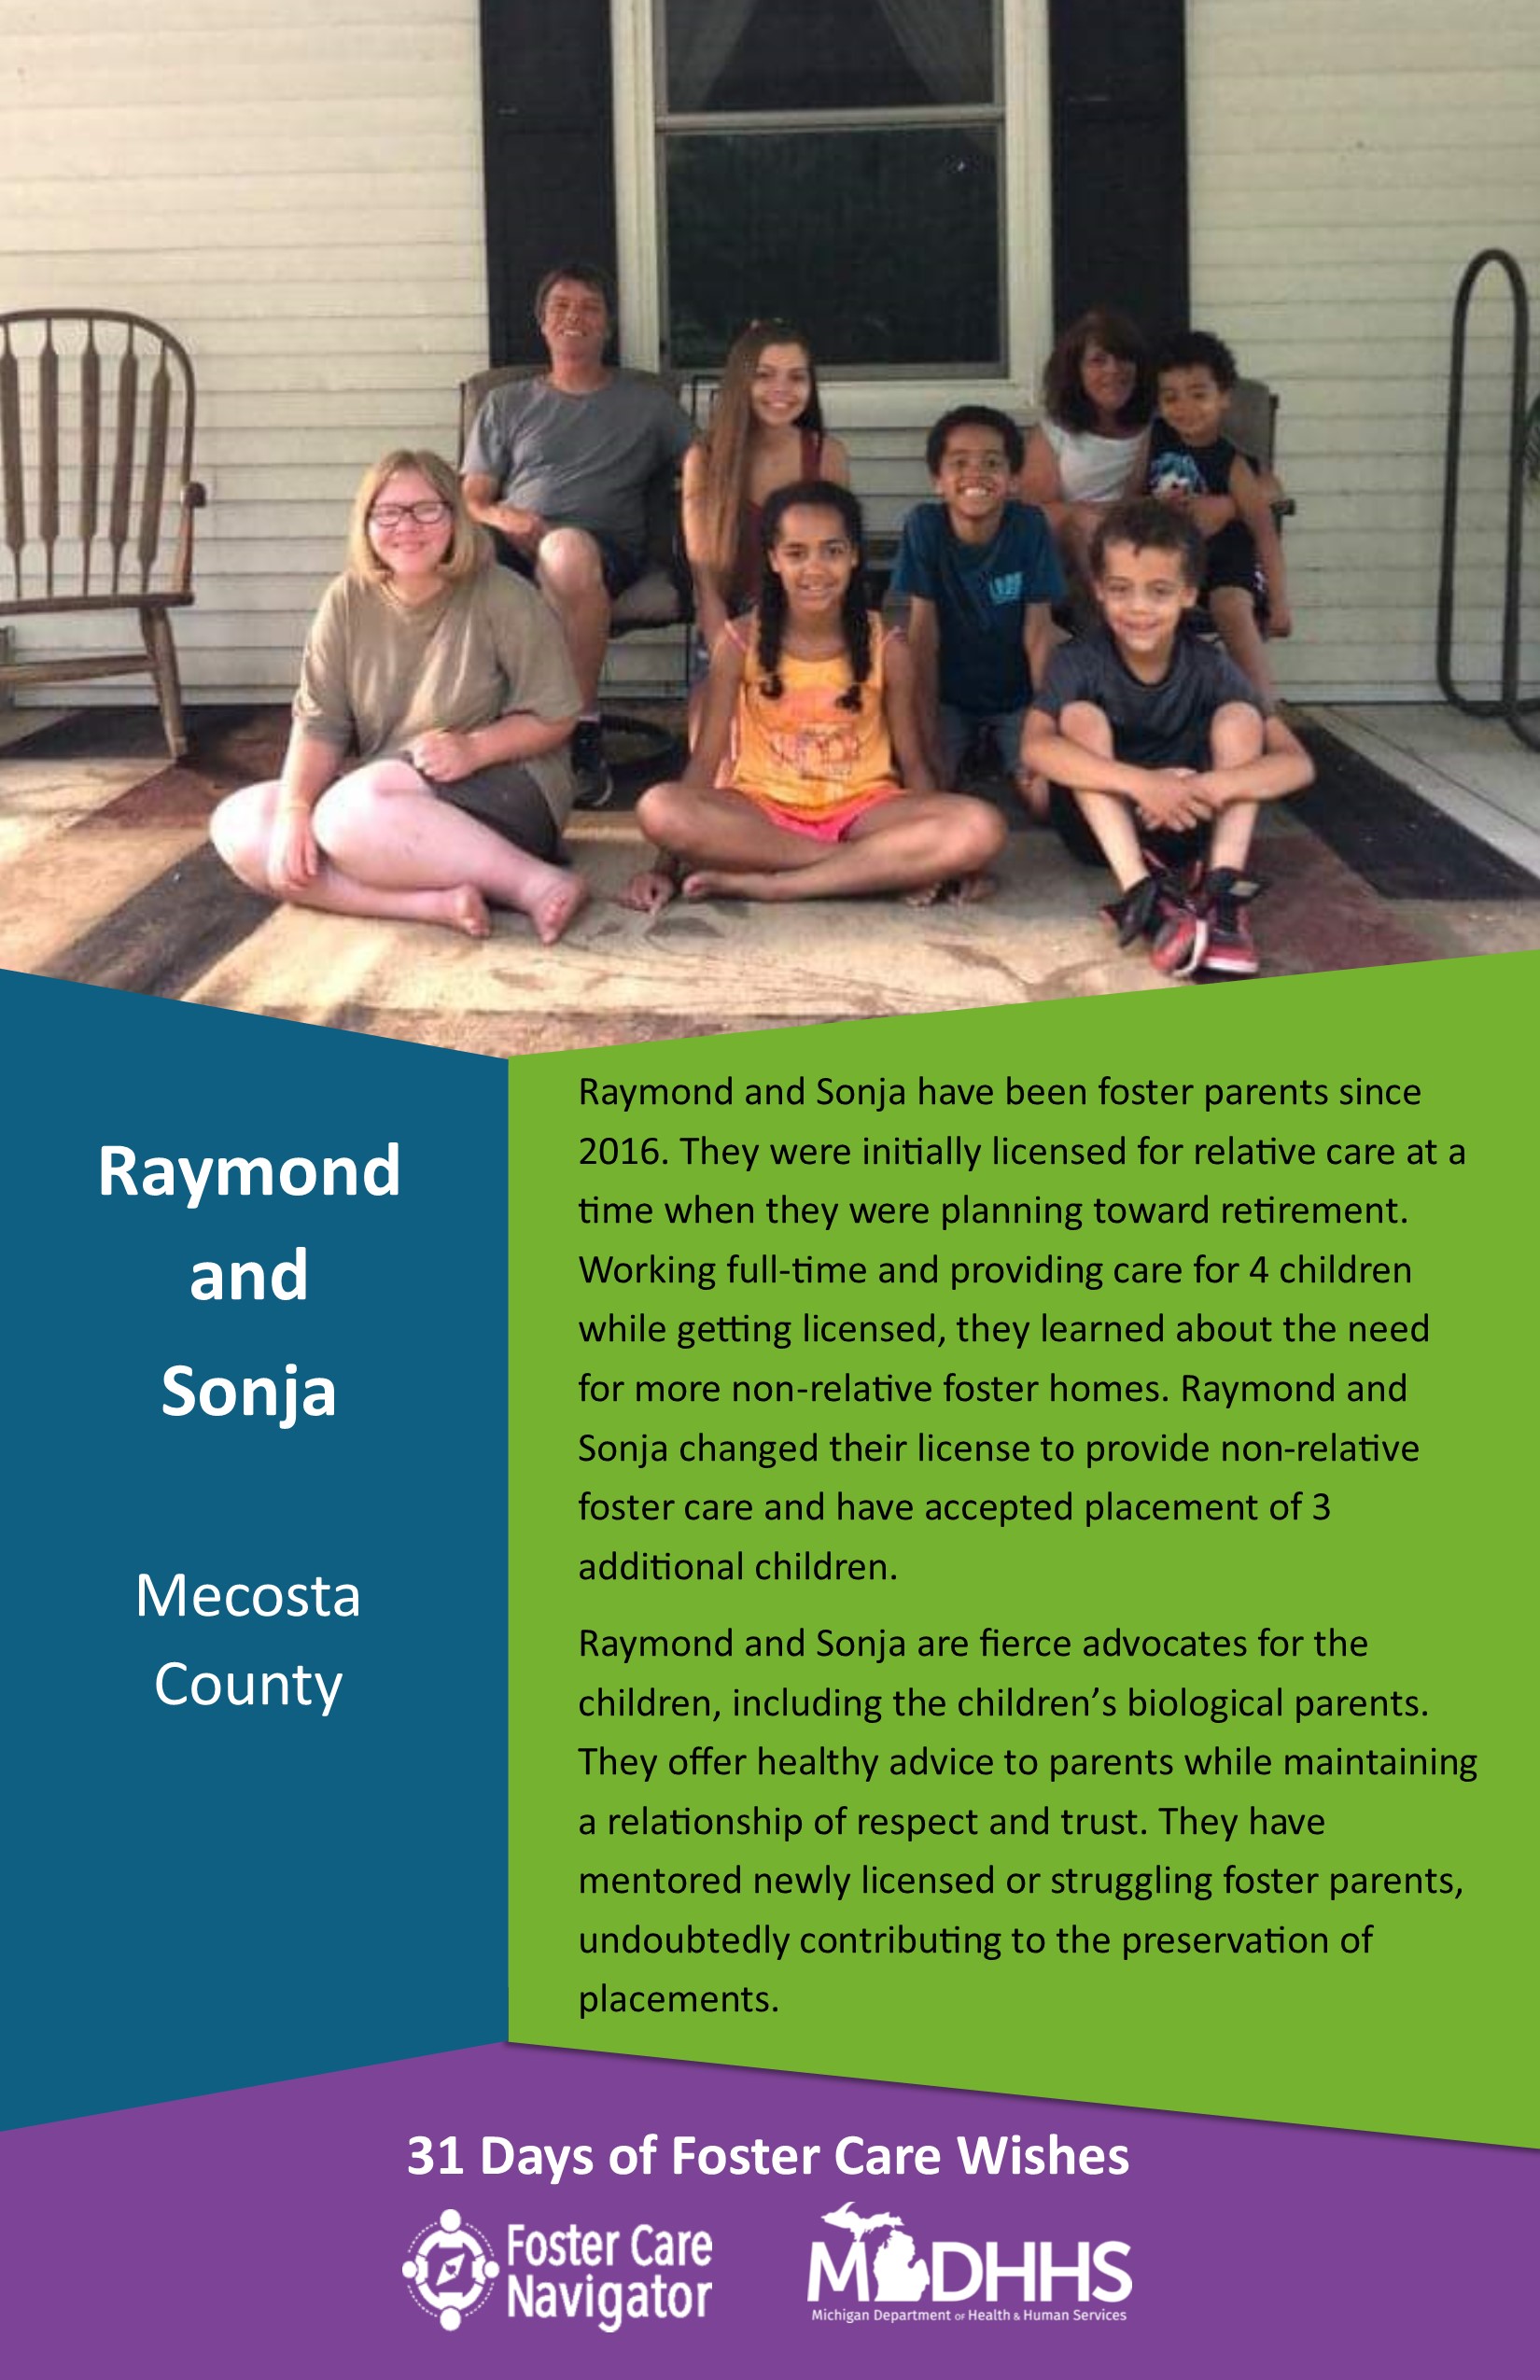 This full page feature includes all of the text listed in the body of this blog post as well as a photo of Raymond and Sonja. The background is blue on the left, green on the right, and purple at the bottom of the page where the logos are located.